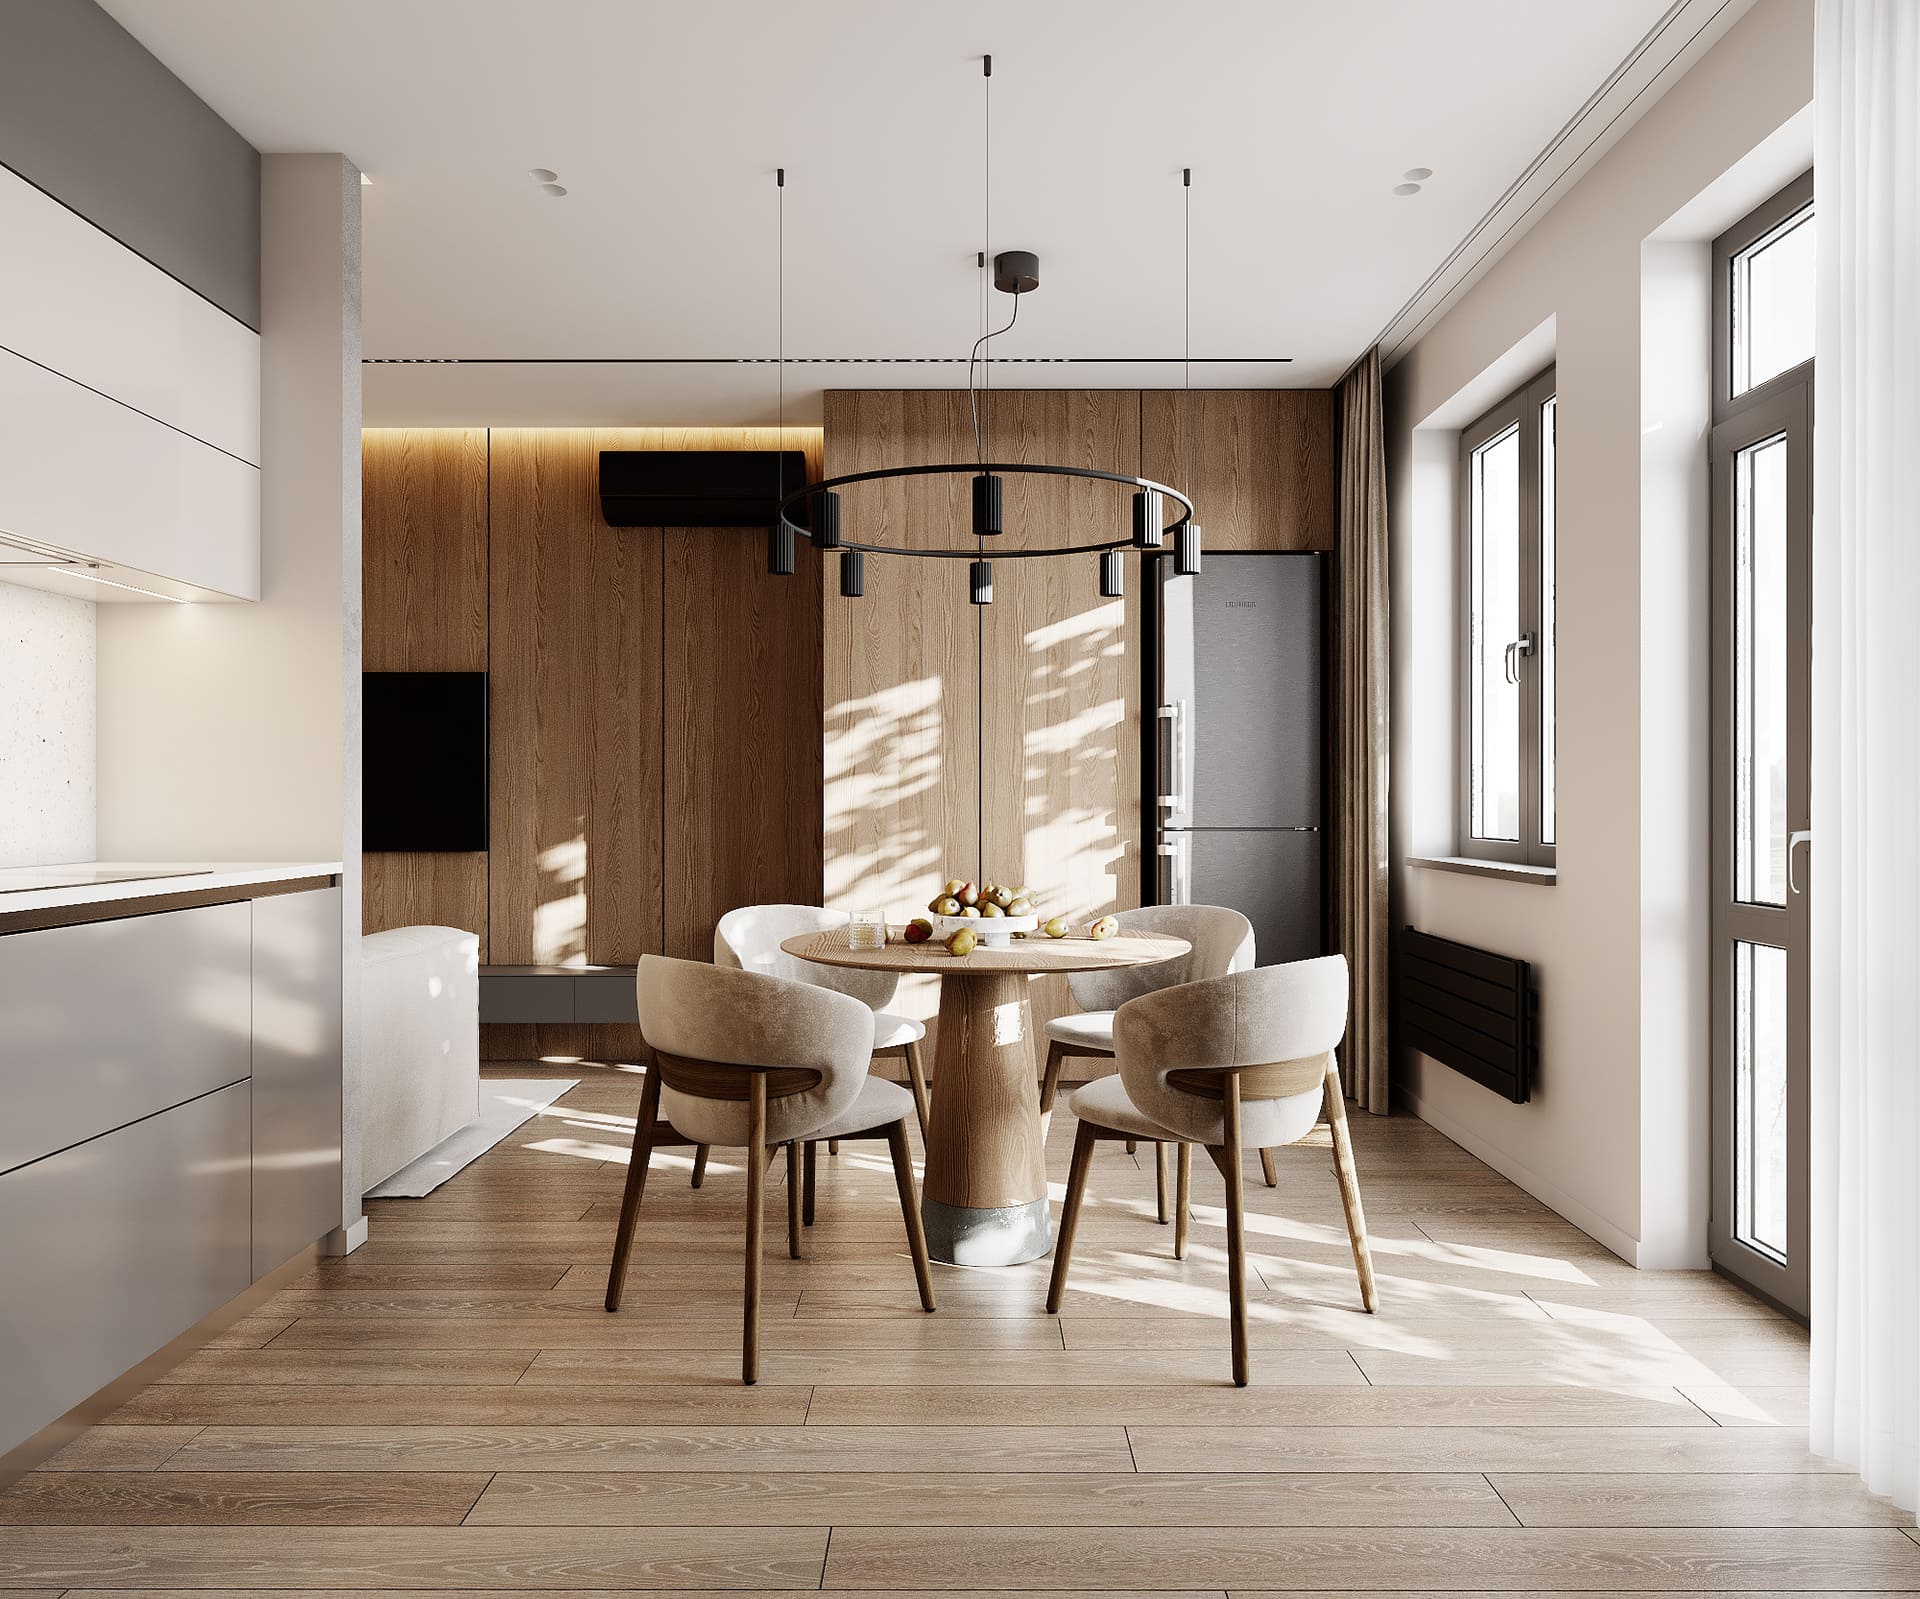 Laconic apartment in the style of minimalism, kitchen-living room, photo 17